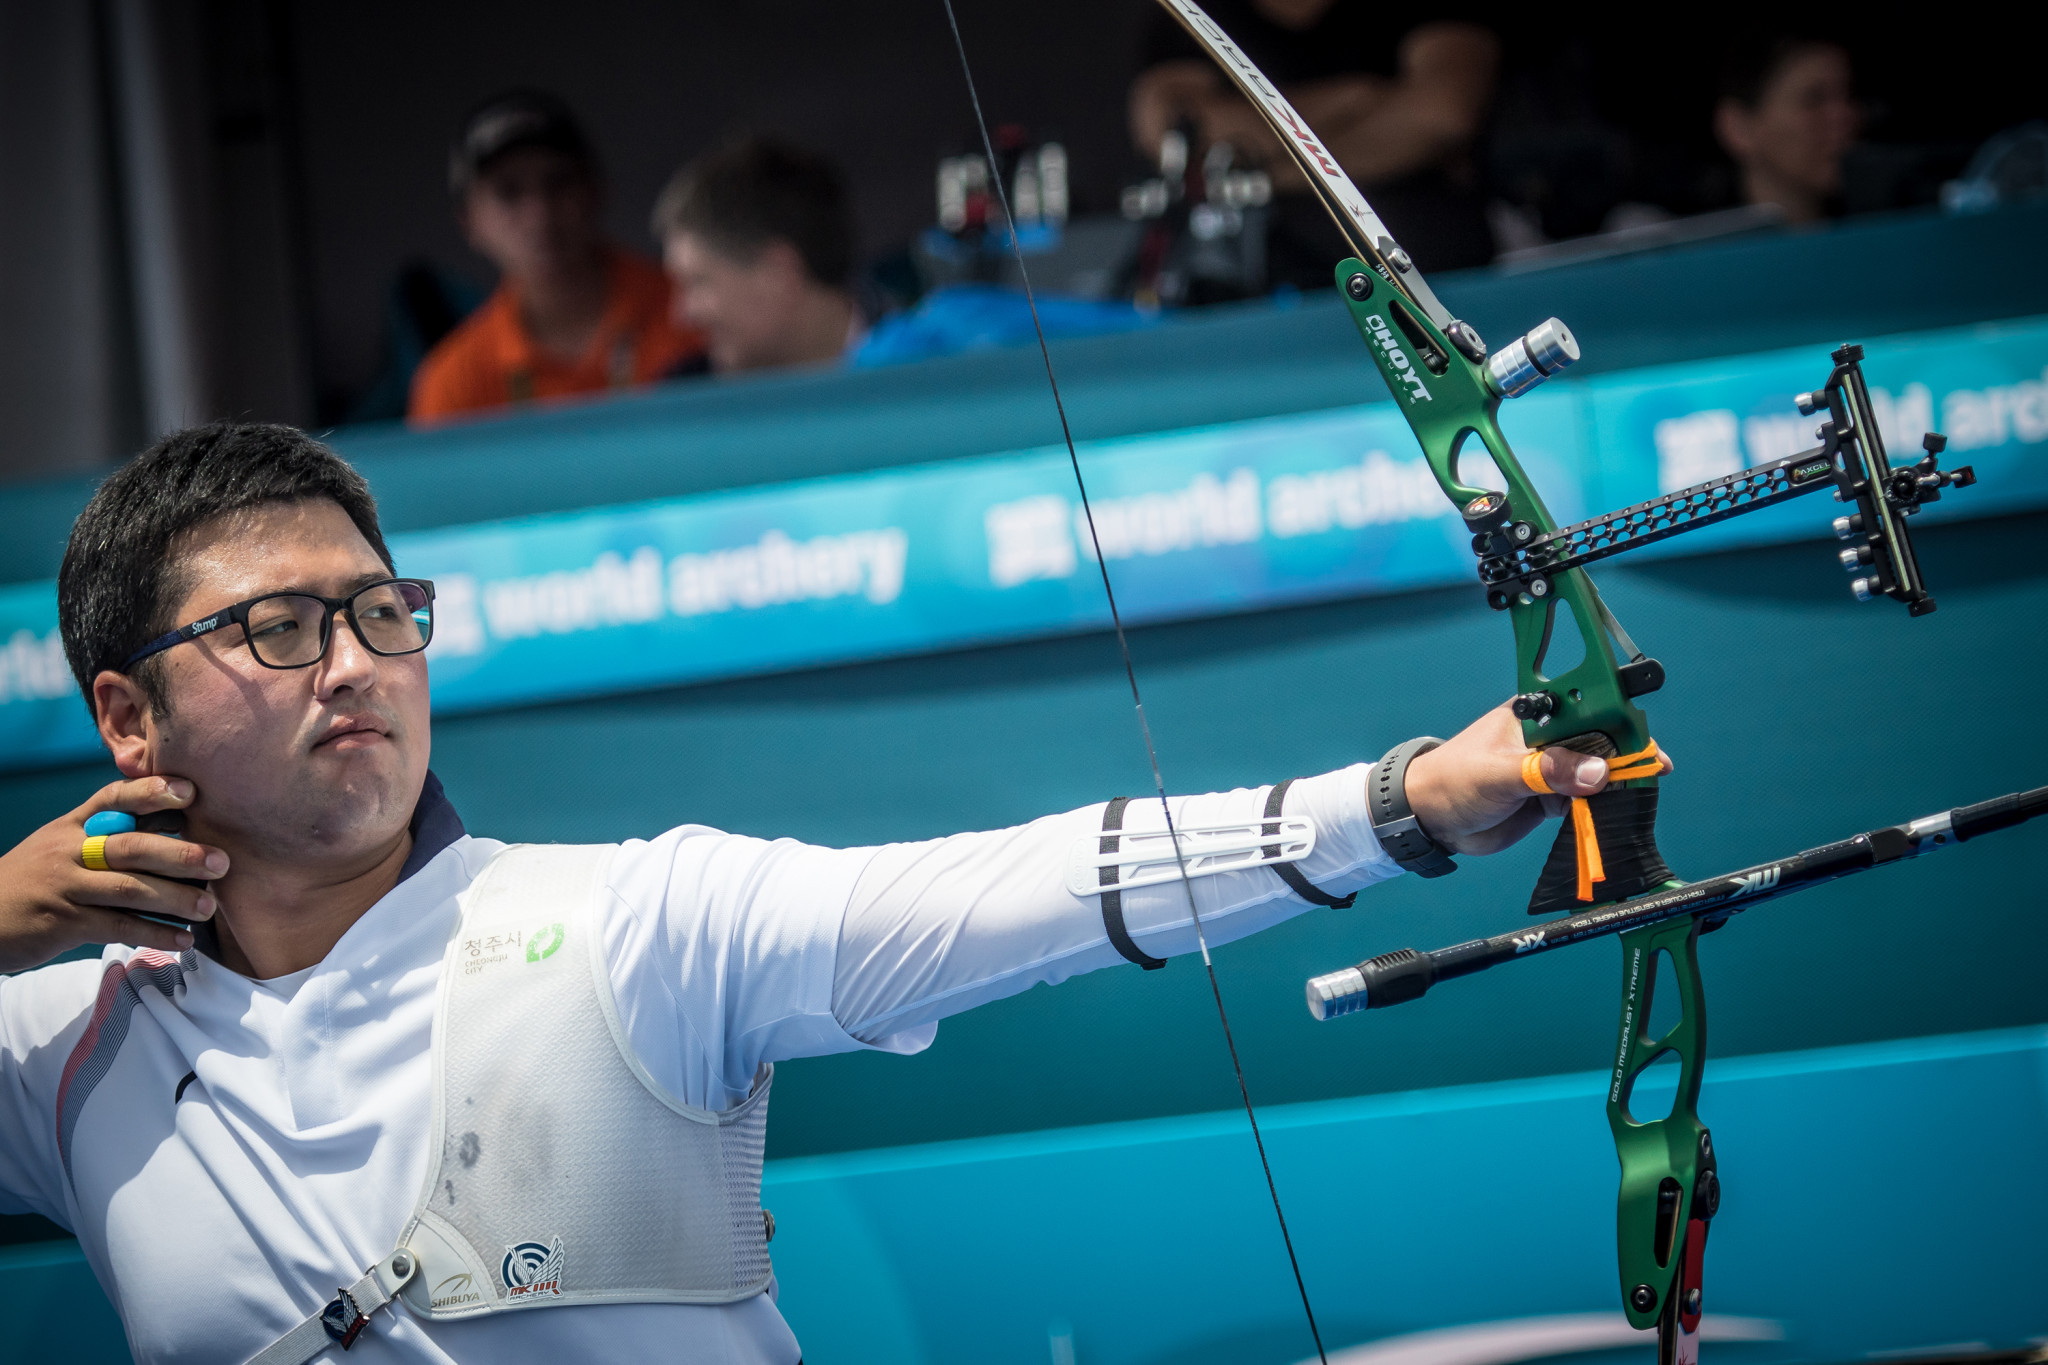 World number one ousts returning Barnes at Archery World Cup in Berlin